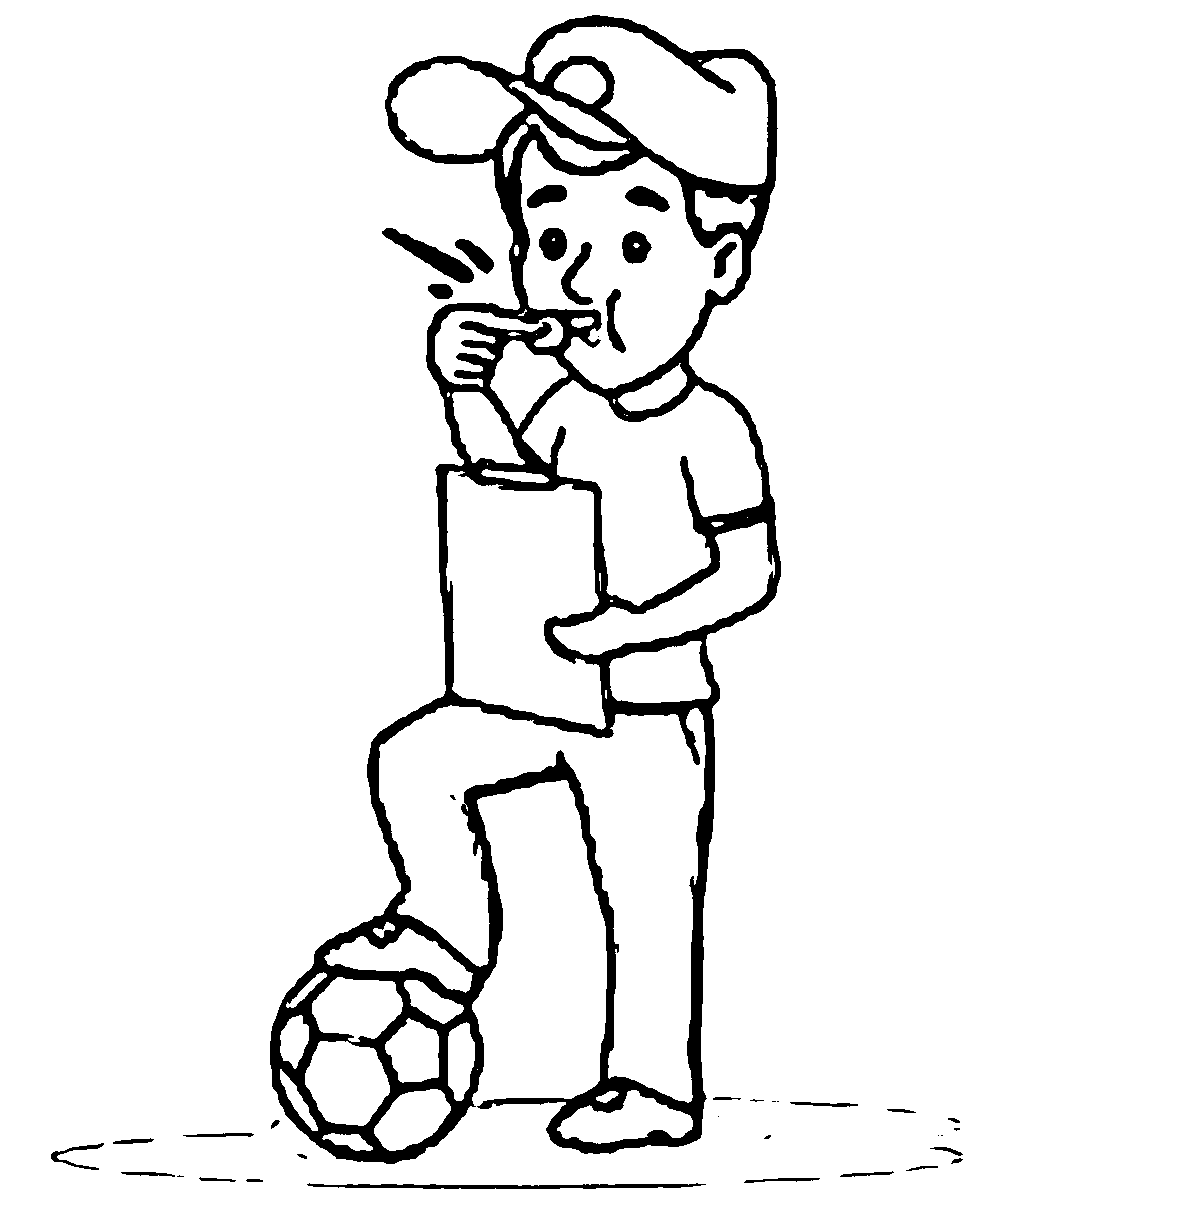 Soccer Coach With Foot On Soccer Ball Playing Football Coloring ...